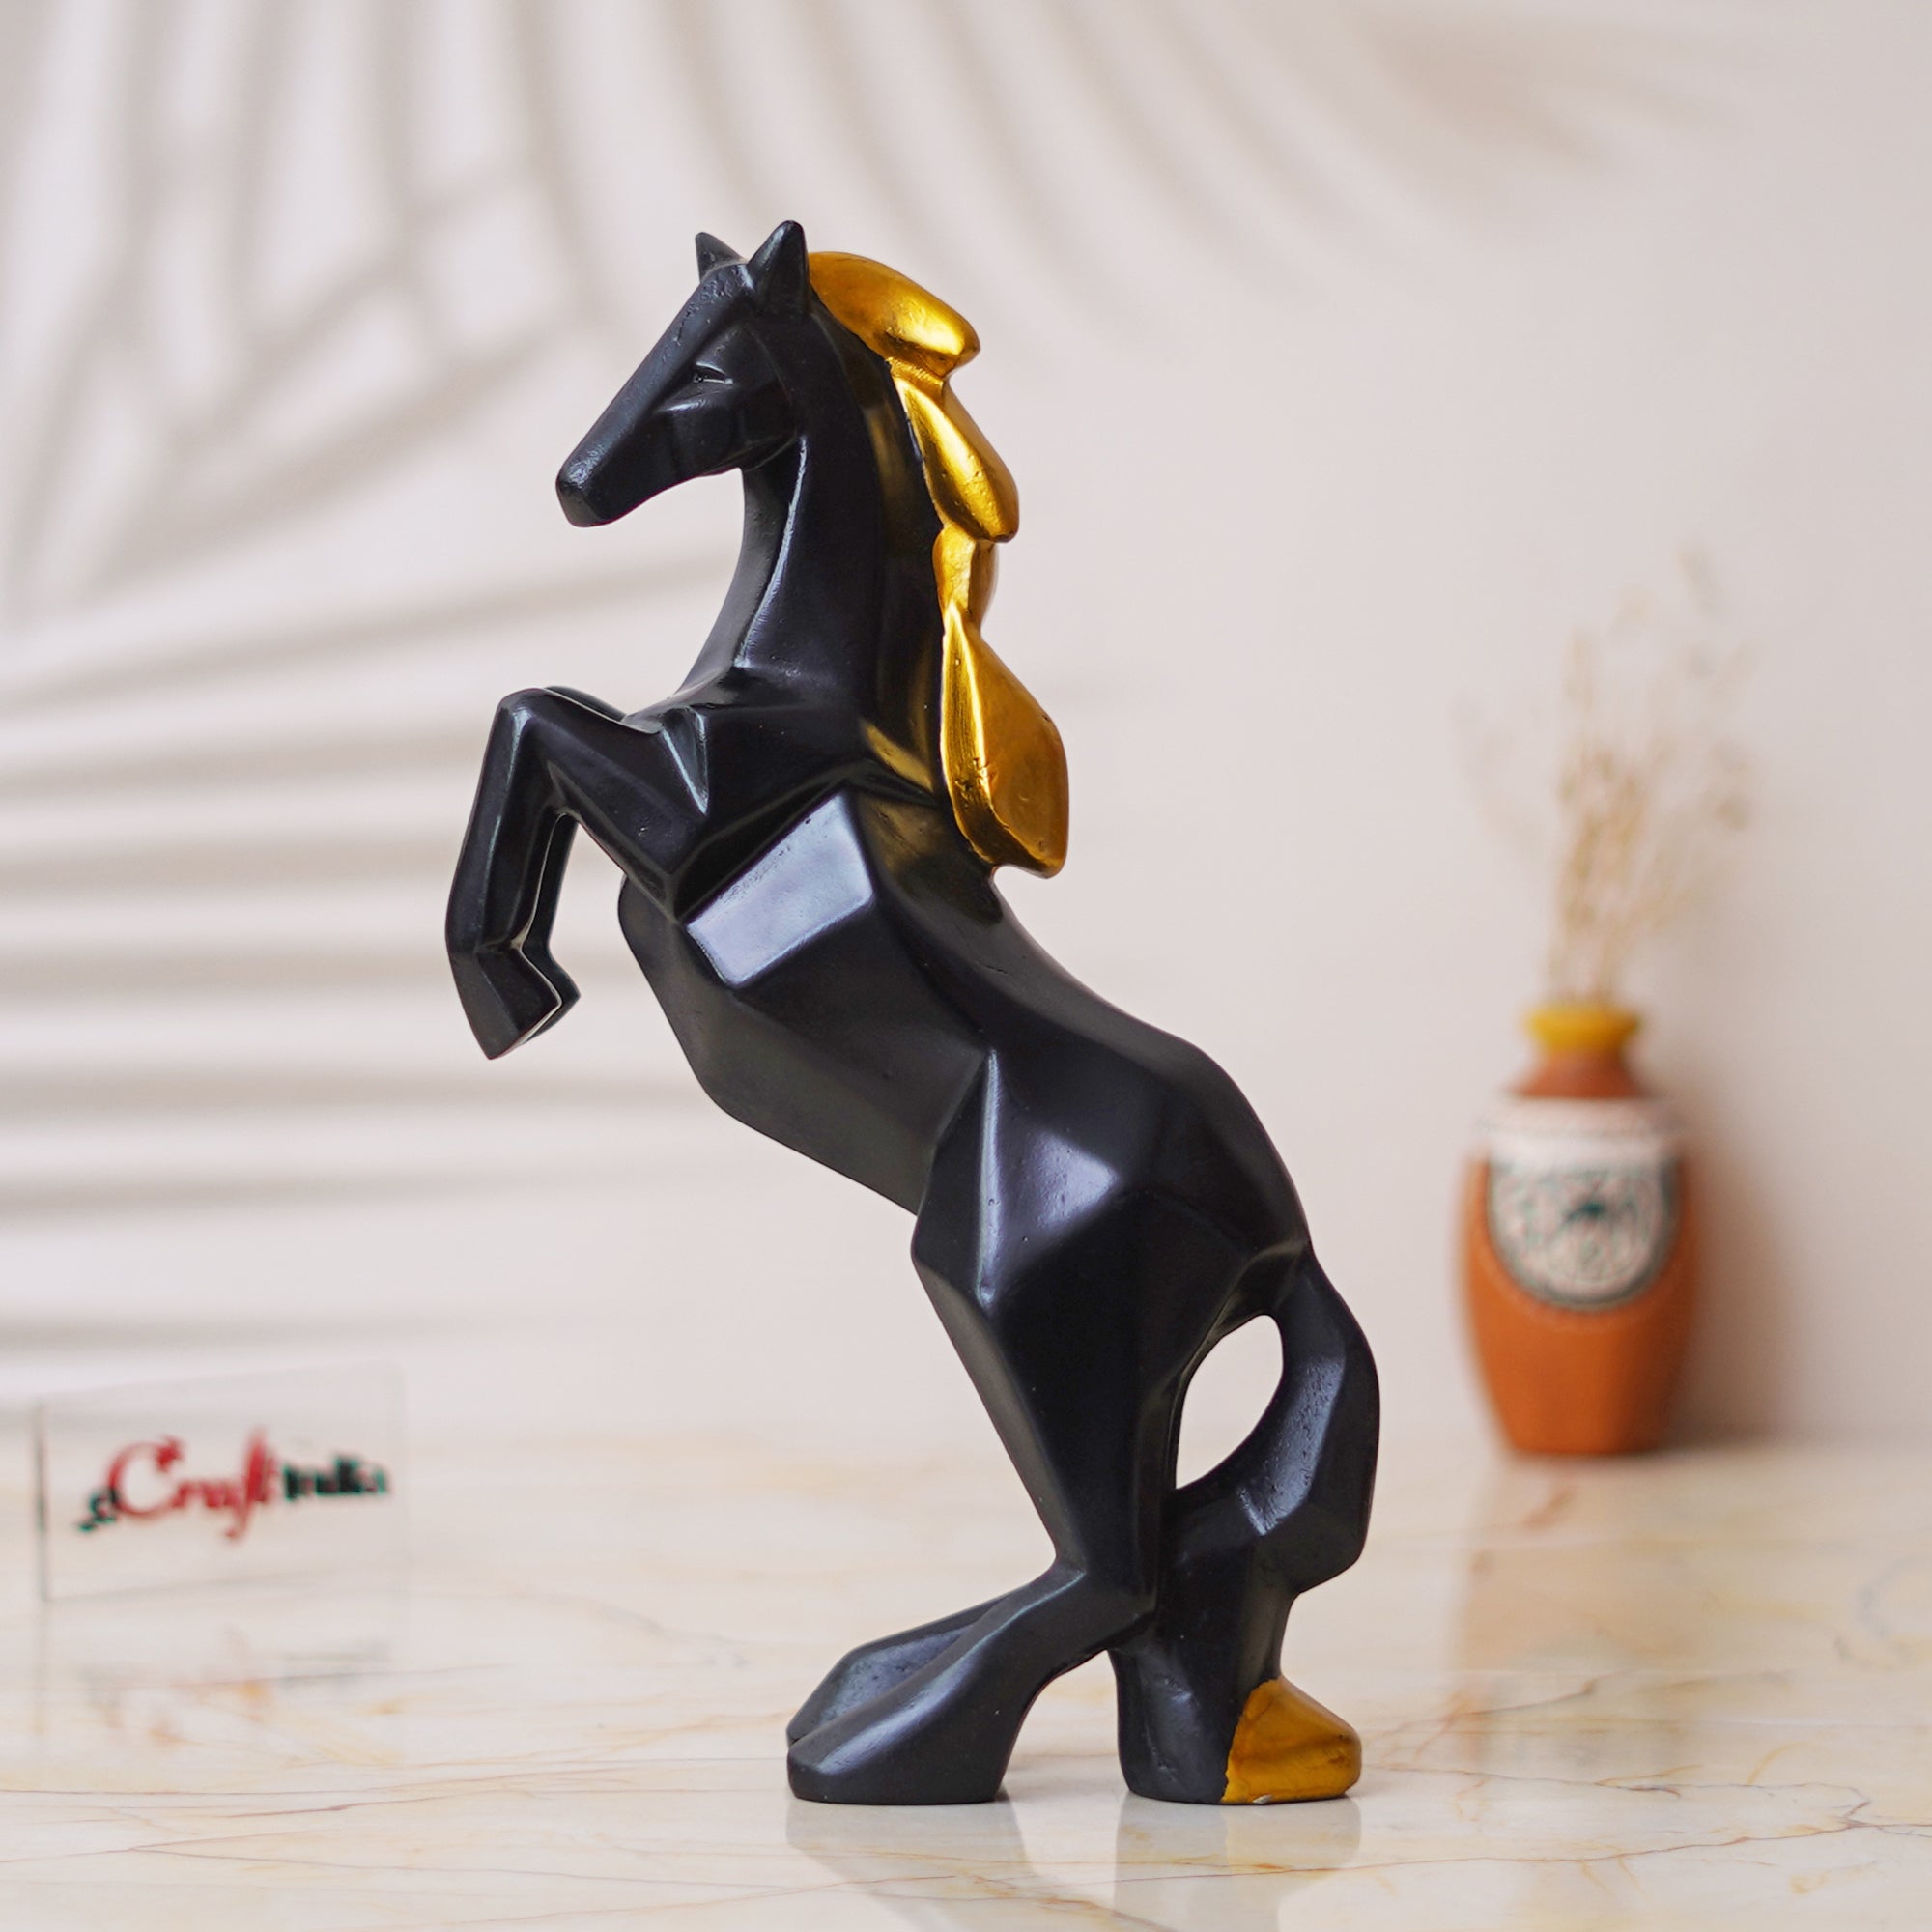 Black Polyresin Jumping Horse Statue with Golden Hair Animal Figurine 1